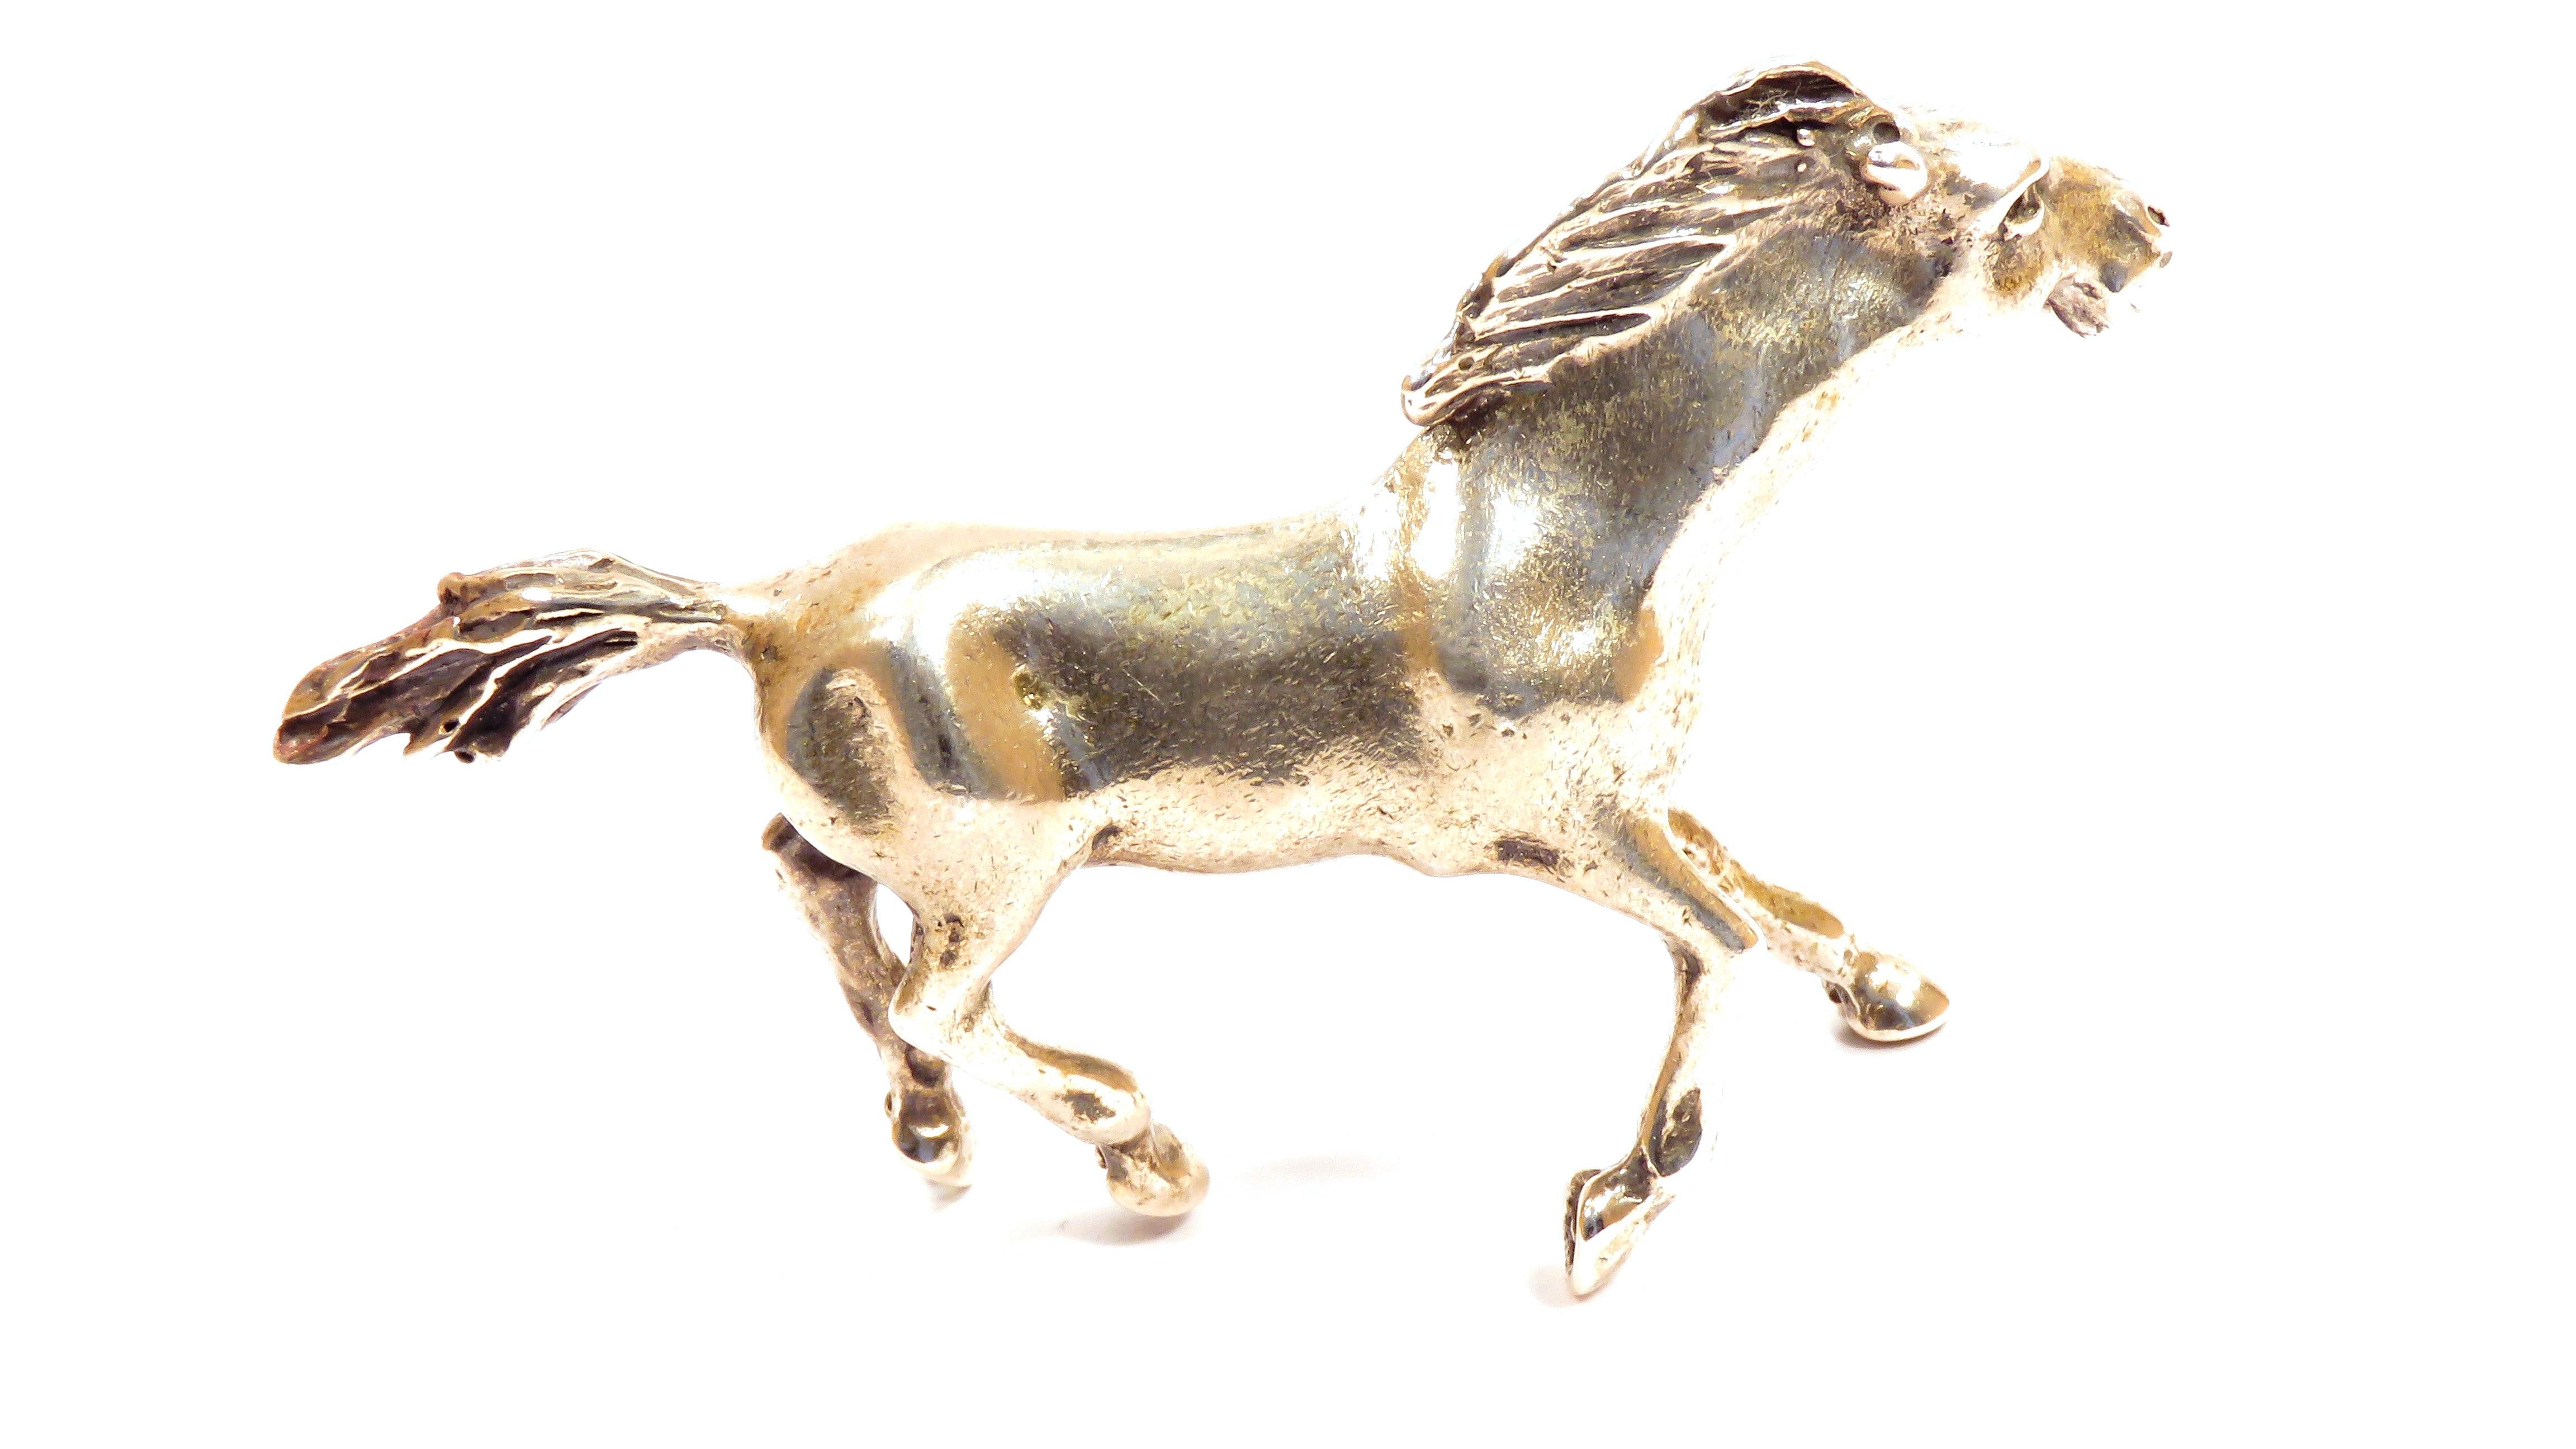 Solid silver horse in very good vintage condition.
Dimensions: Height 48 mm / 1.889 inches - Length 66 mm / 2.598 inches - Weight 44 grams.
It  is stamped with the Silver Italian Mark